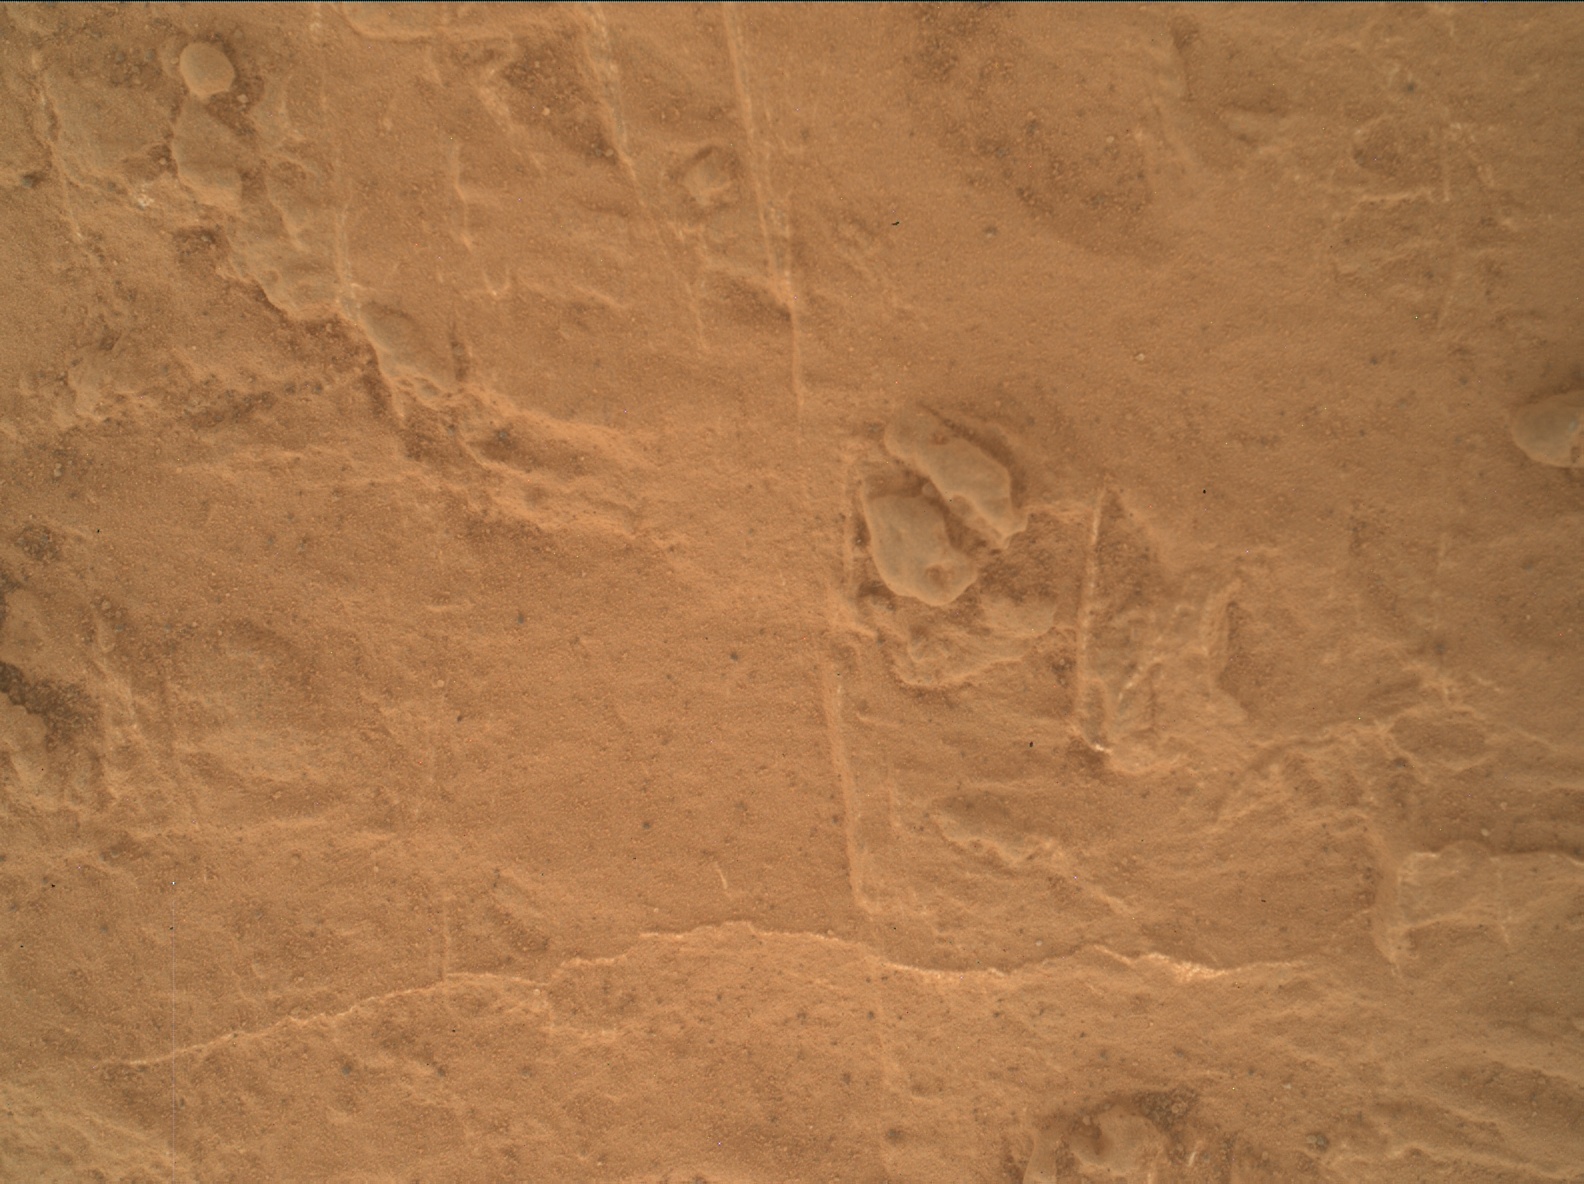 Nasa's Mars rover Curiosity acquired this image using its Mars Hand Lens Imager (MAHLI) on Sol 3199